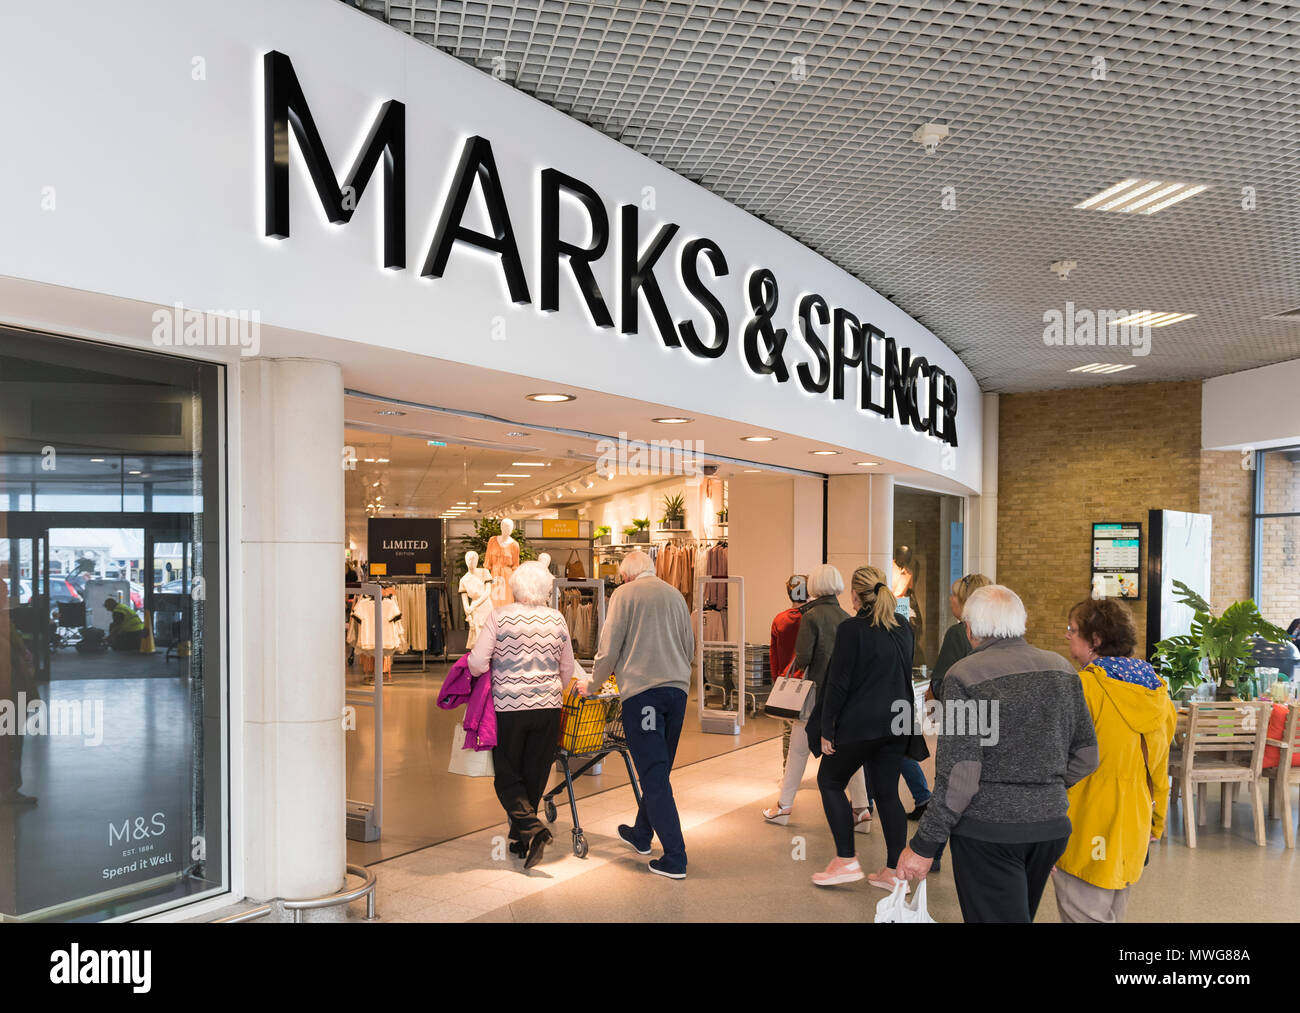 Marks and Spencer shop front. M&S store front in Holmbush Shopping Centre, Shoreham, West Sussex, England, UK. Shopping mall. Retail store. Stock Photo